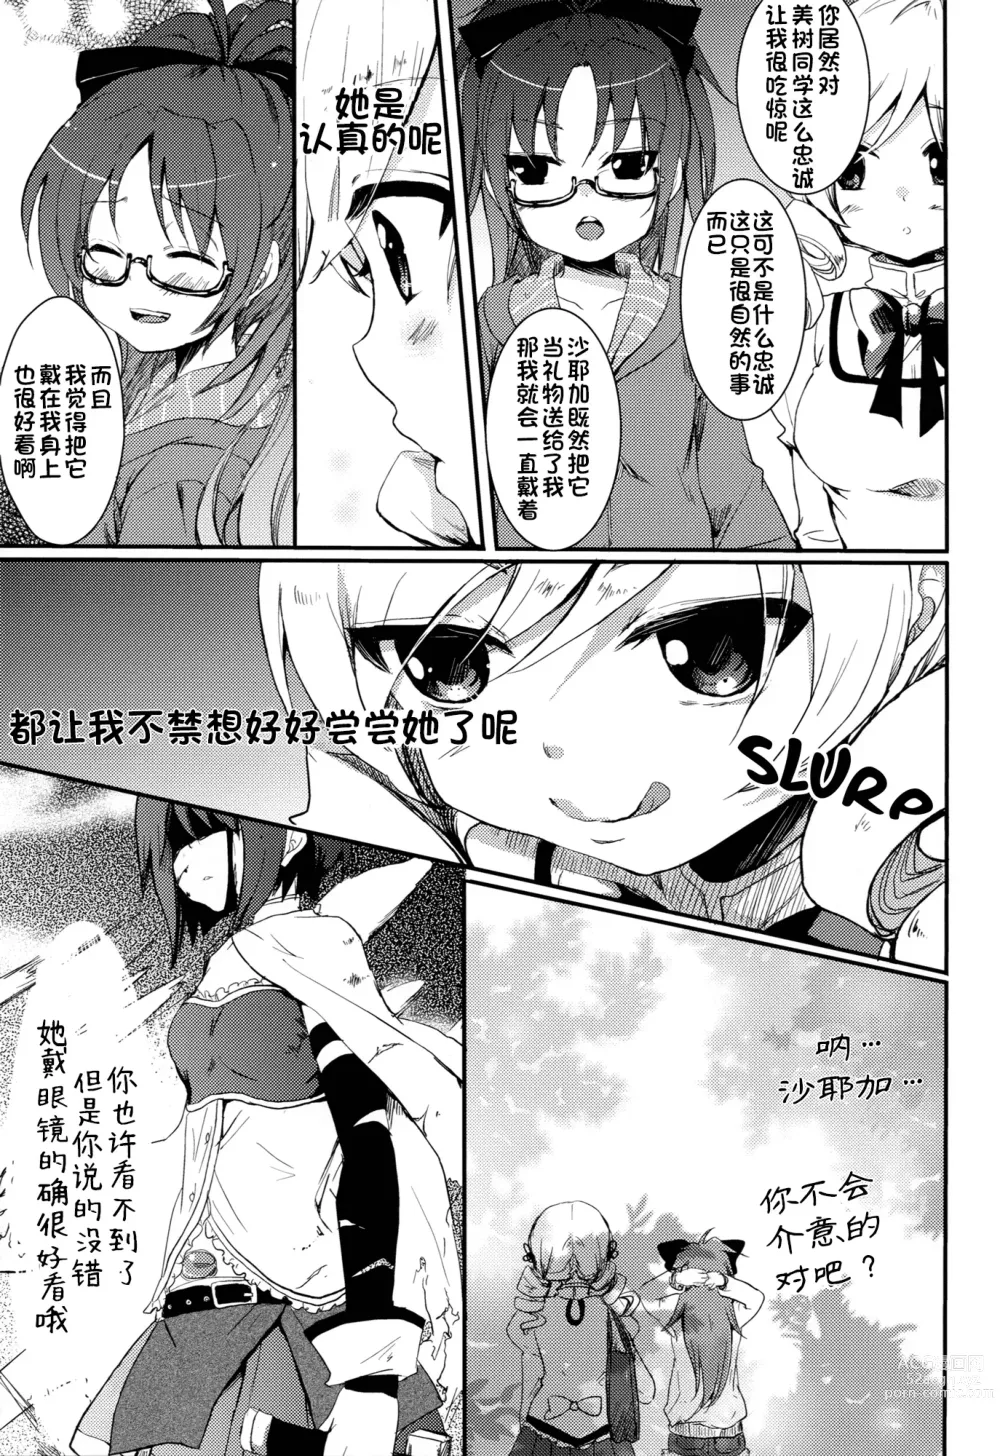 Page 5 of doujinshi Do You Like Your Red Beans Mashed or Whole